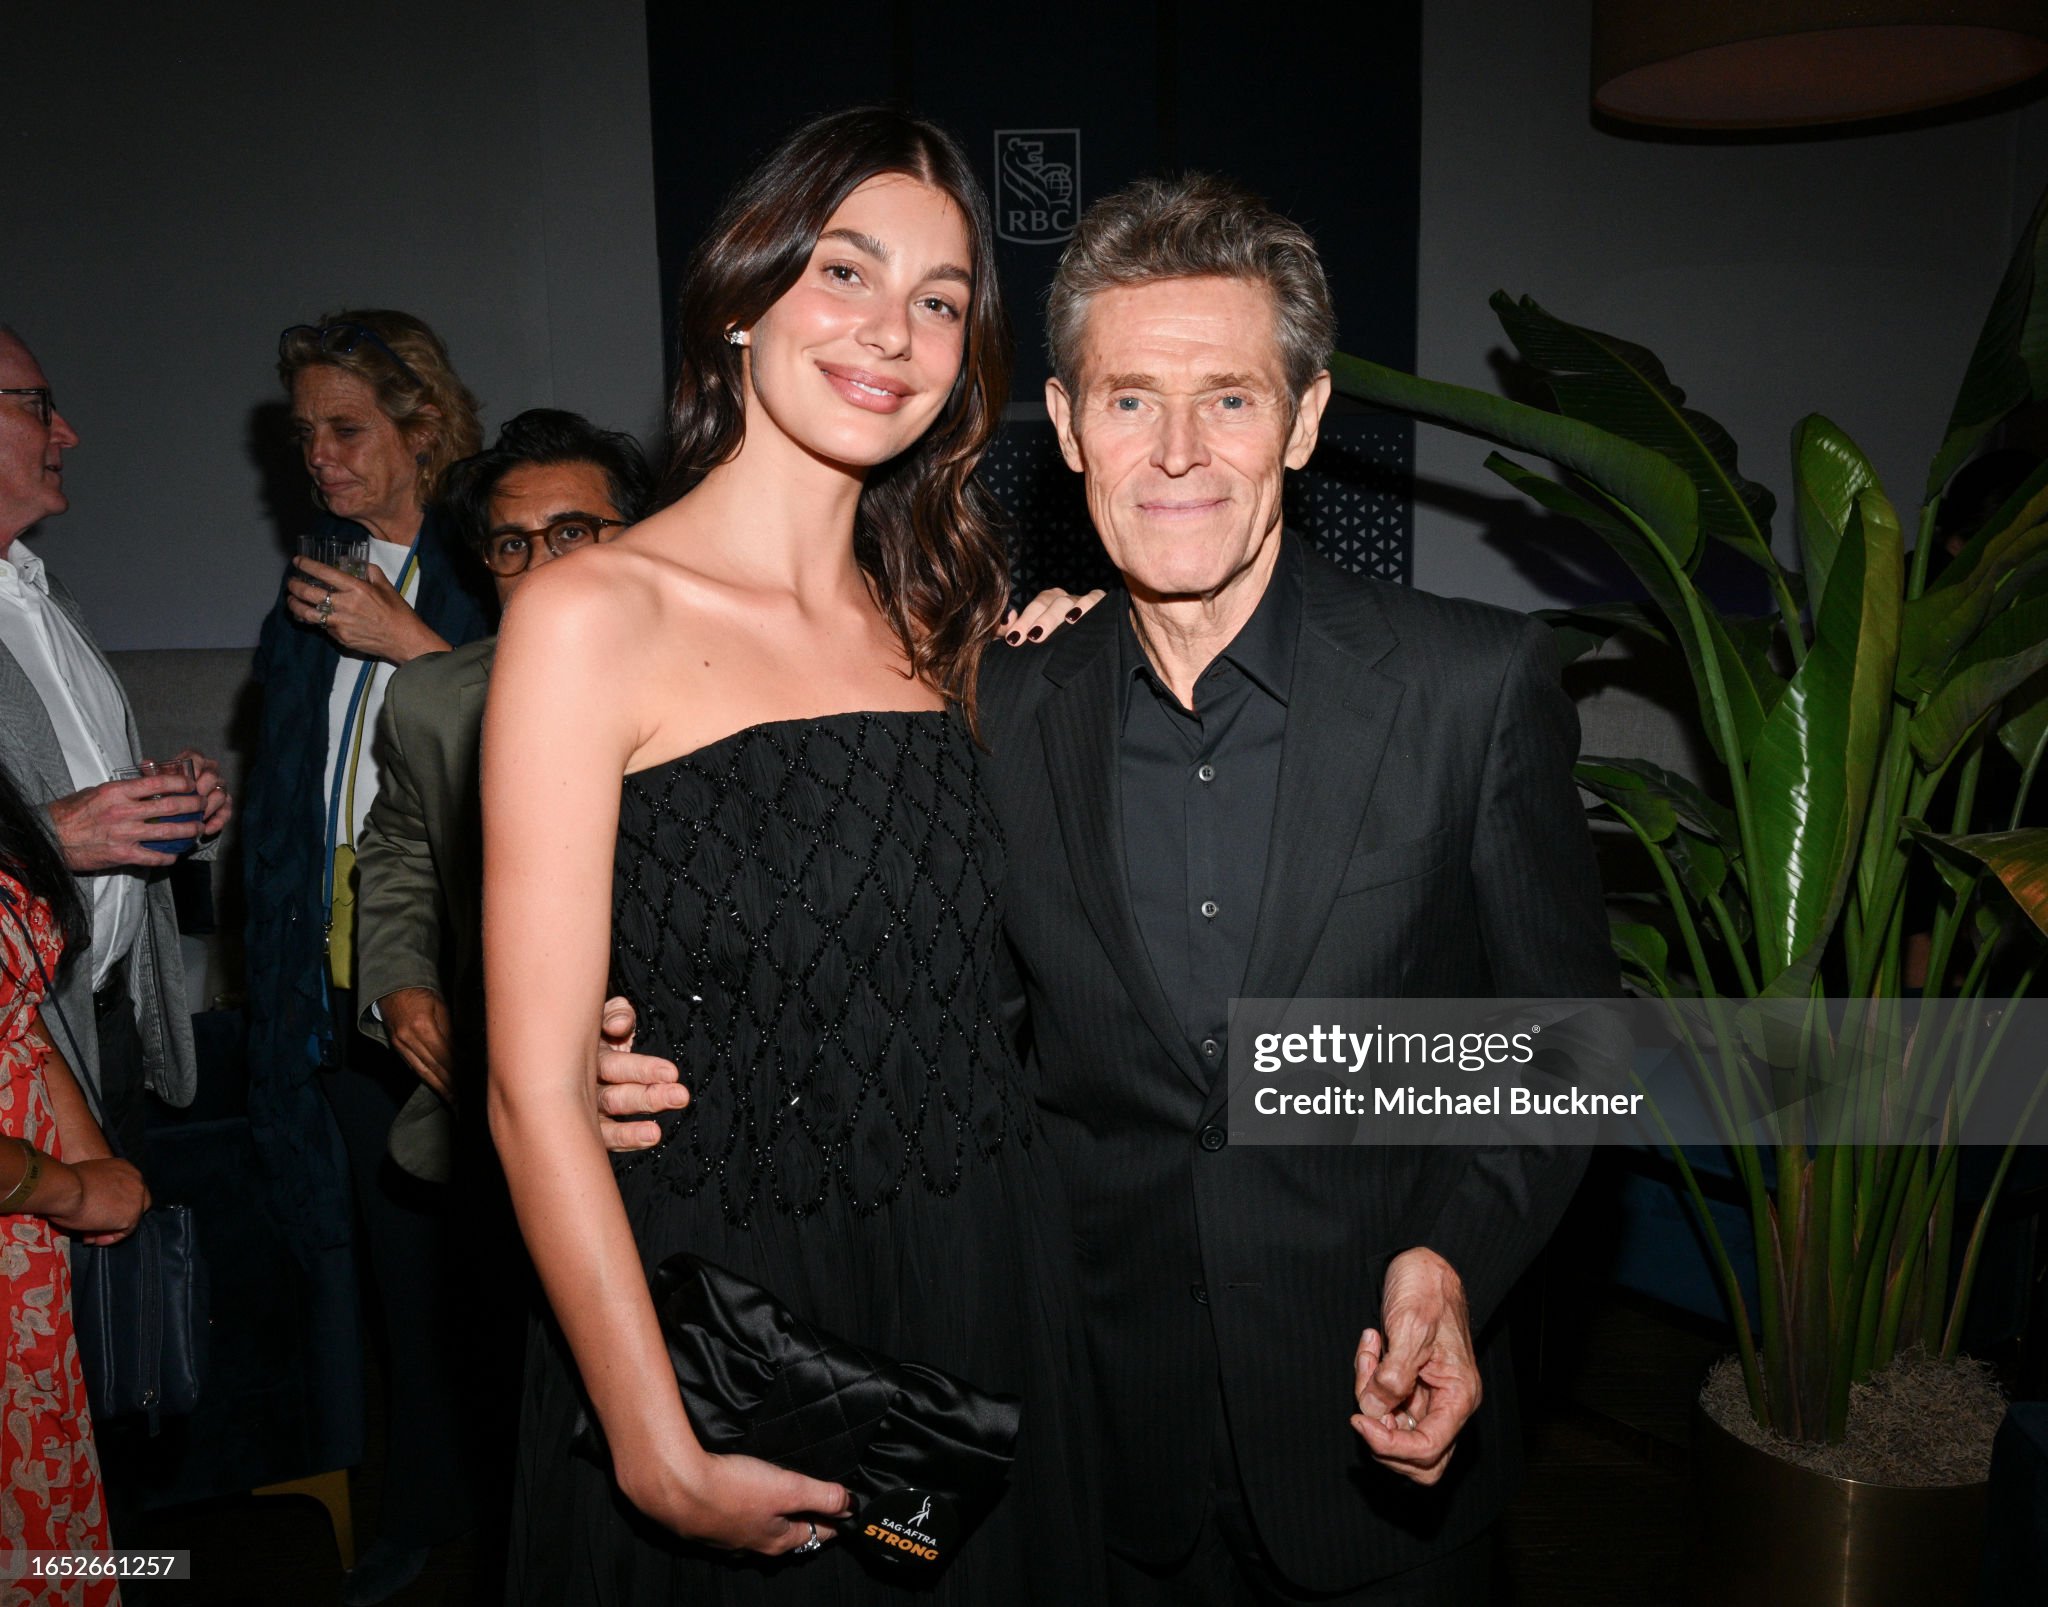 camila-morrone-and-willem-dafoe-at-the-p